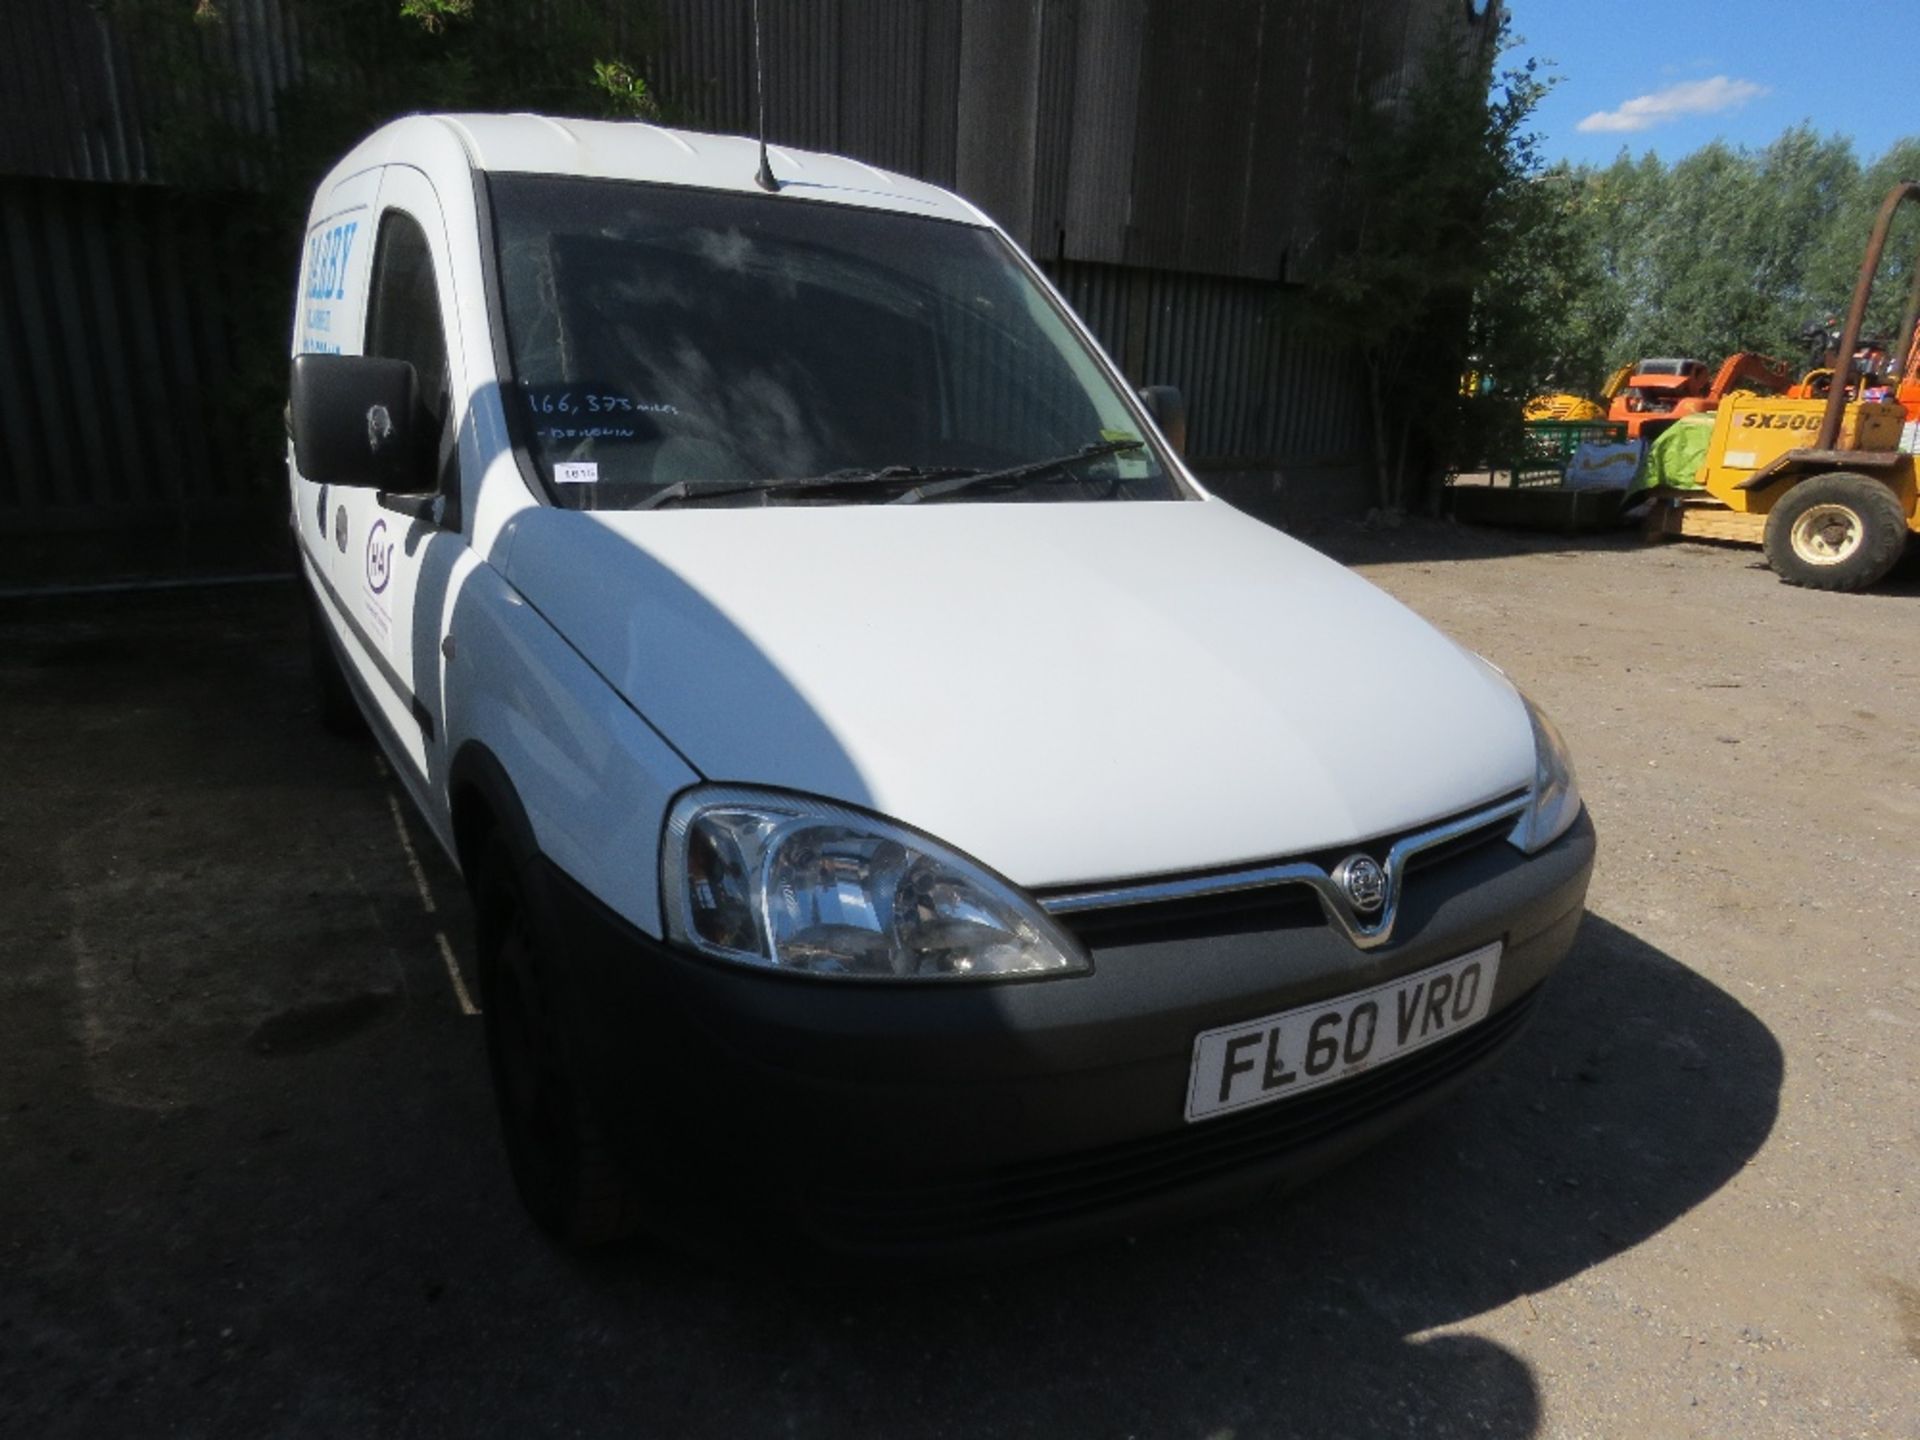 VAUXHALL COMBO VAN REG;FL60 VRO 166,373 WITH V5 TESTED TILL OCTOBER 2022. WHEN TESTED WAS SEEN T